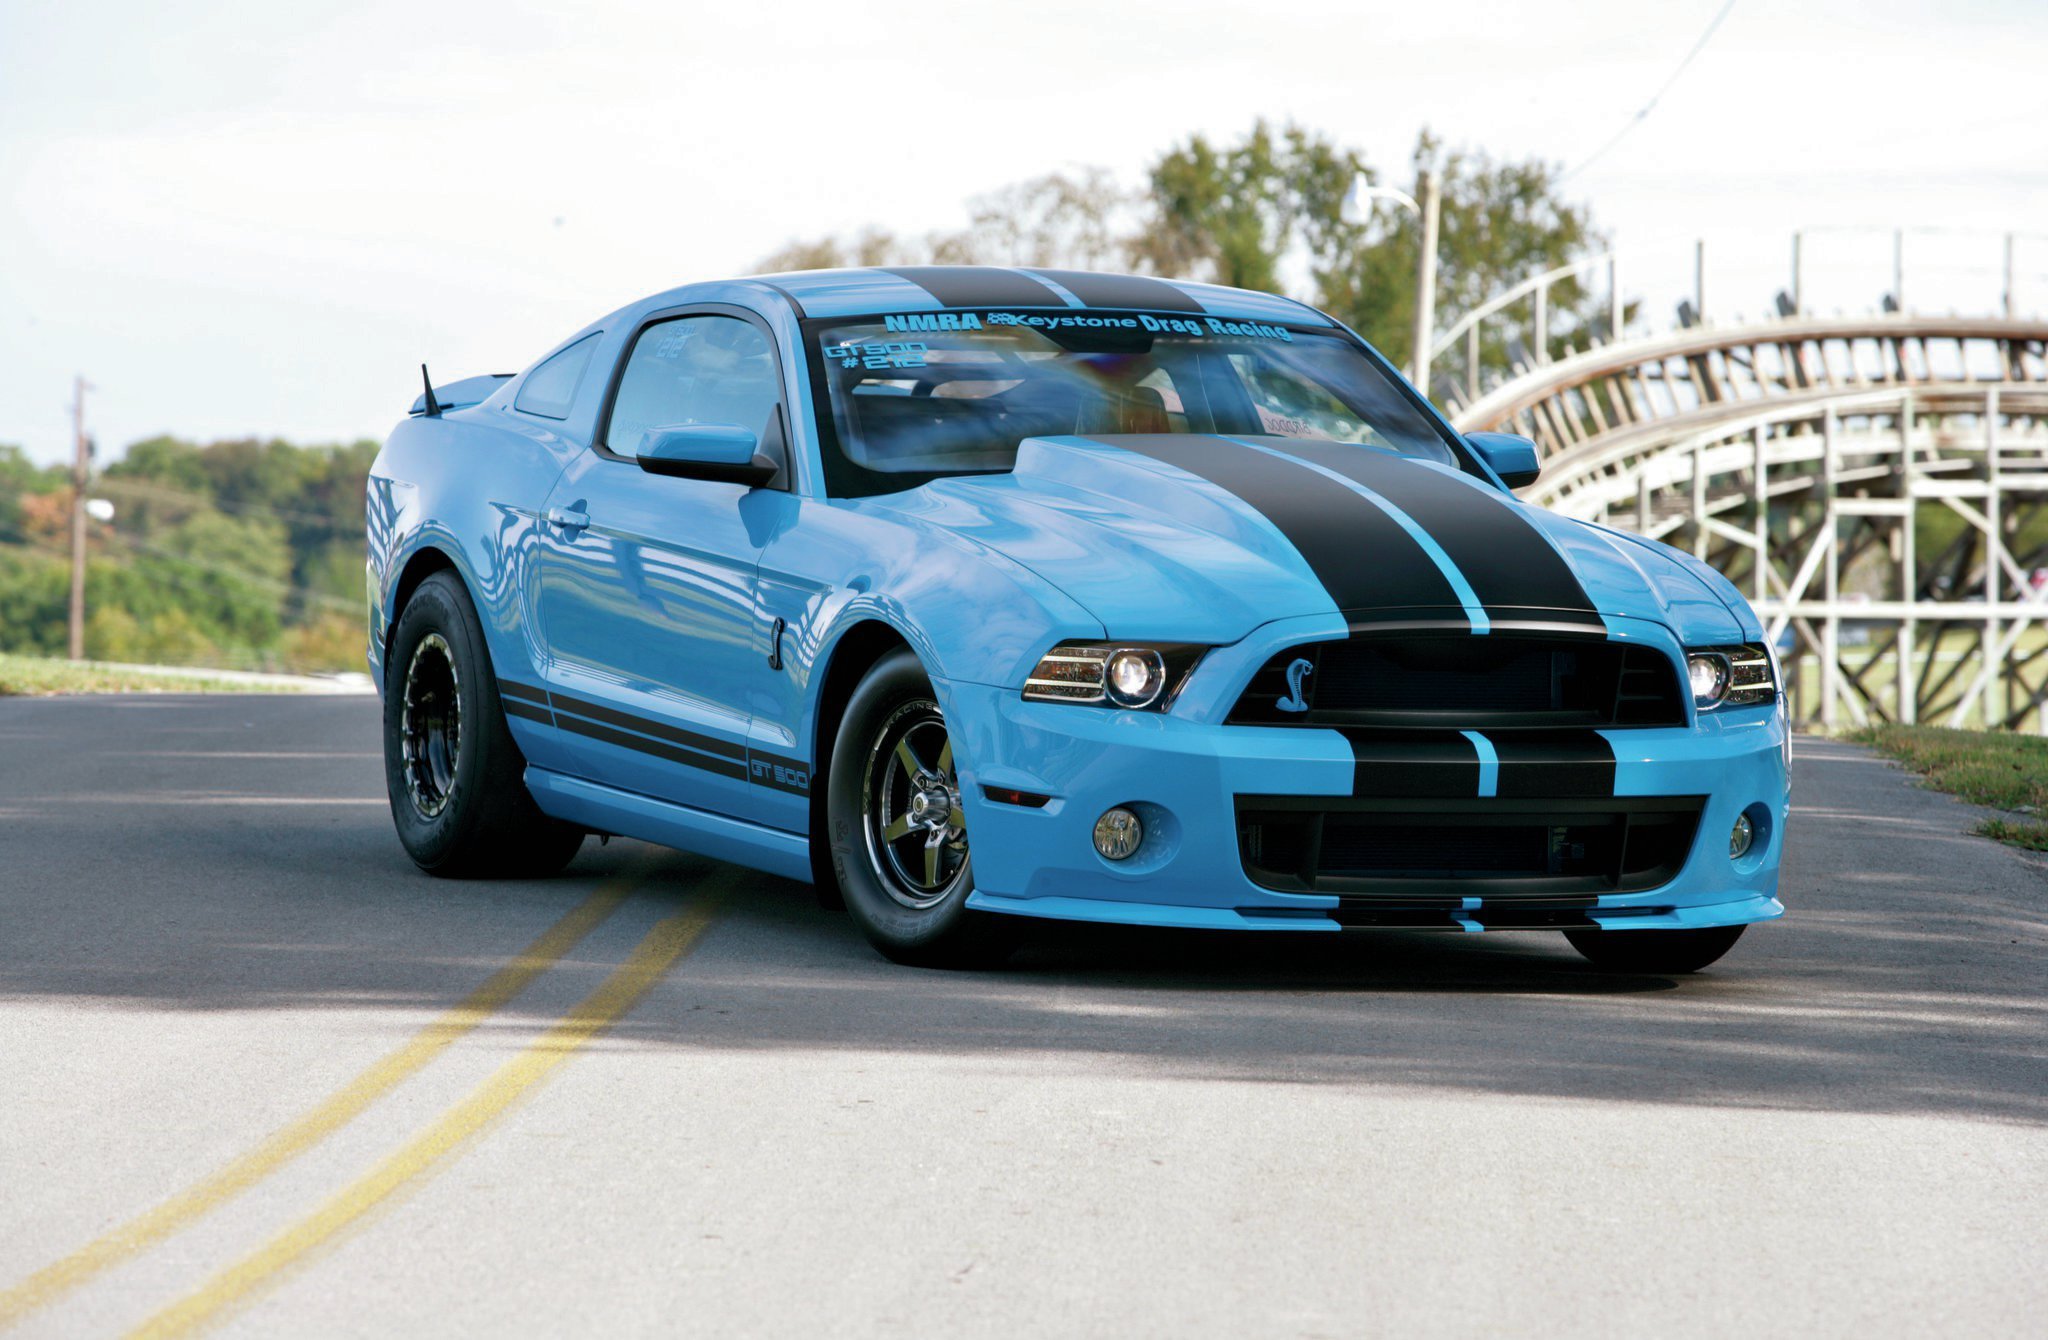 2013, Ford, Mustang, Shelby, Gt500, Street, Drag, Pro, Super, Usa, 2048x1340 01 Wallpaper